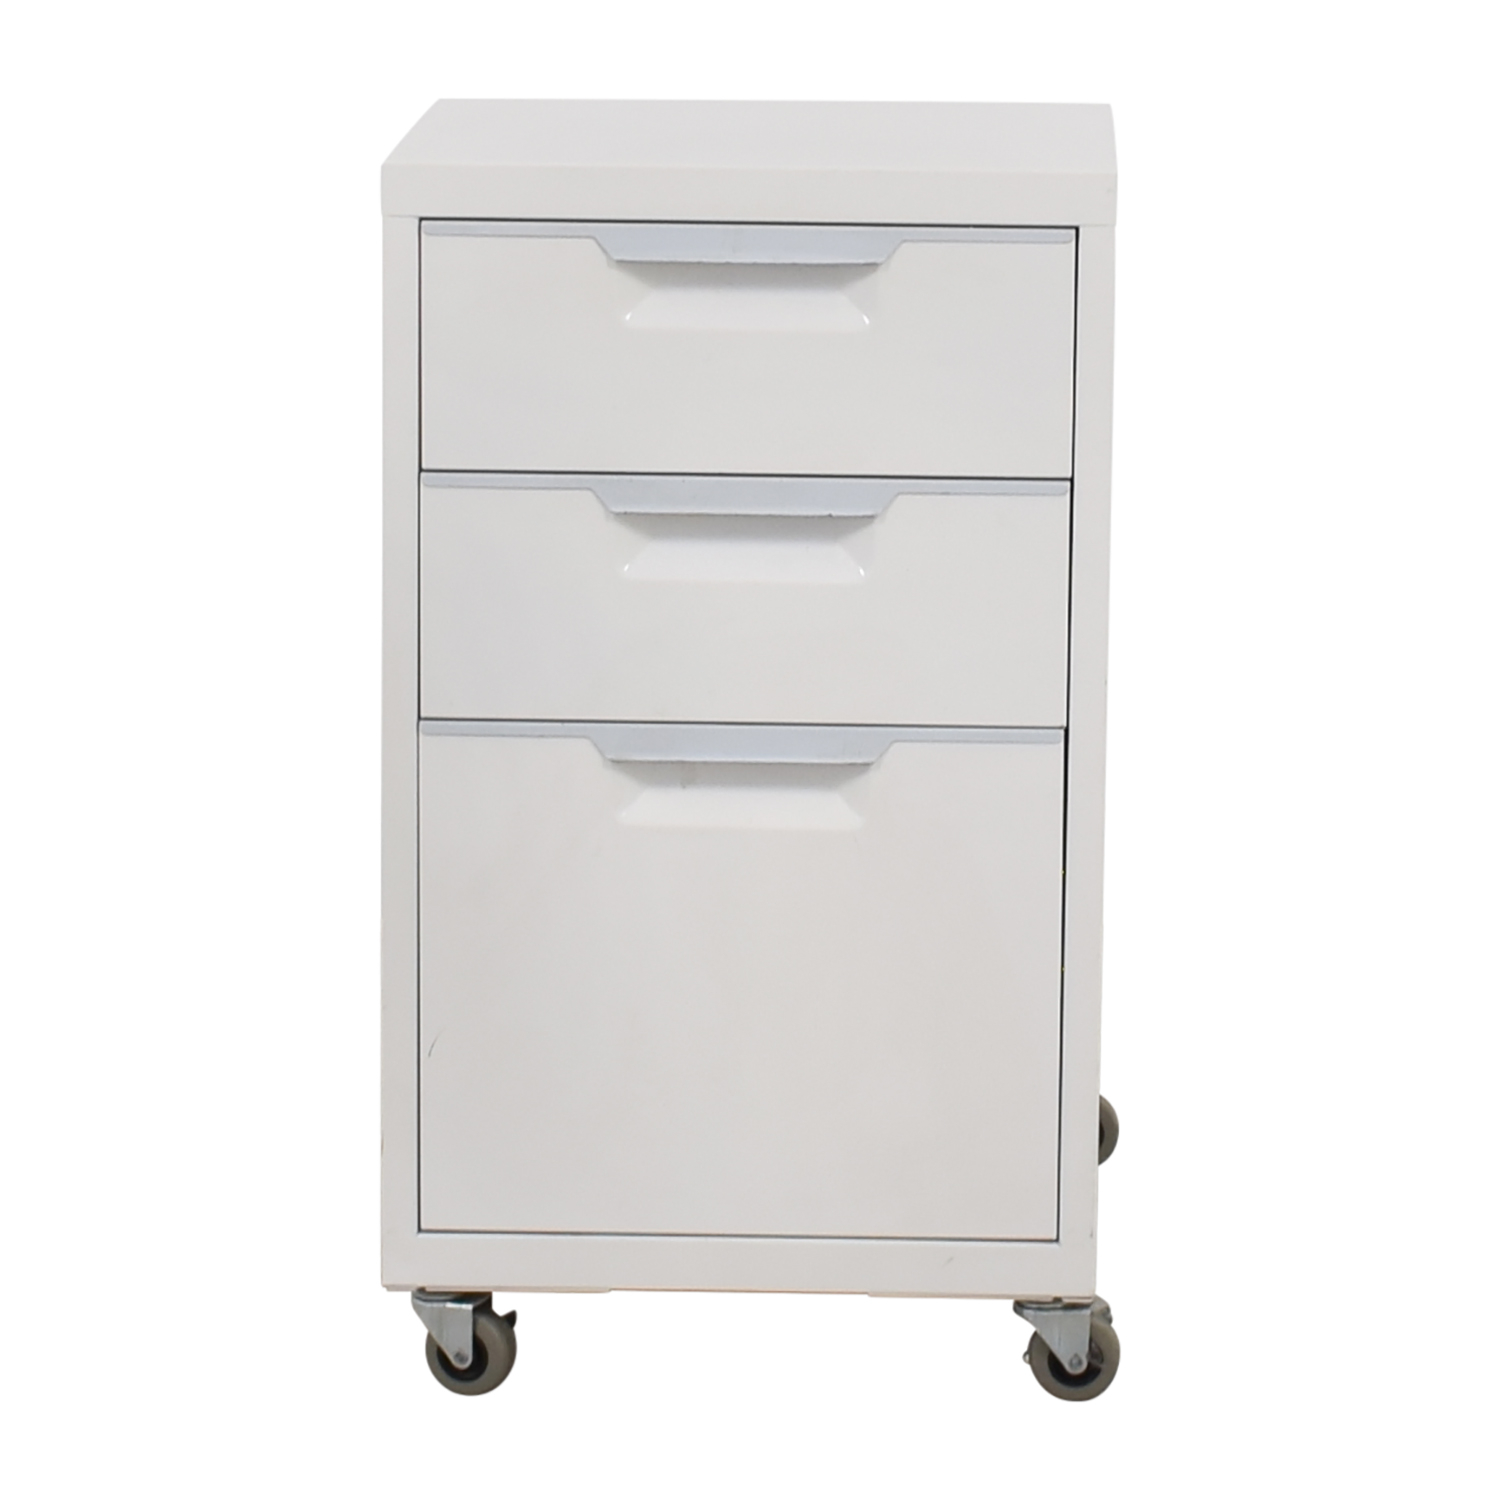 88 Off Cb2 Cb2 Tps White 3 Drawer Filing Cabinet Storage in sizing 1500 X 1500